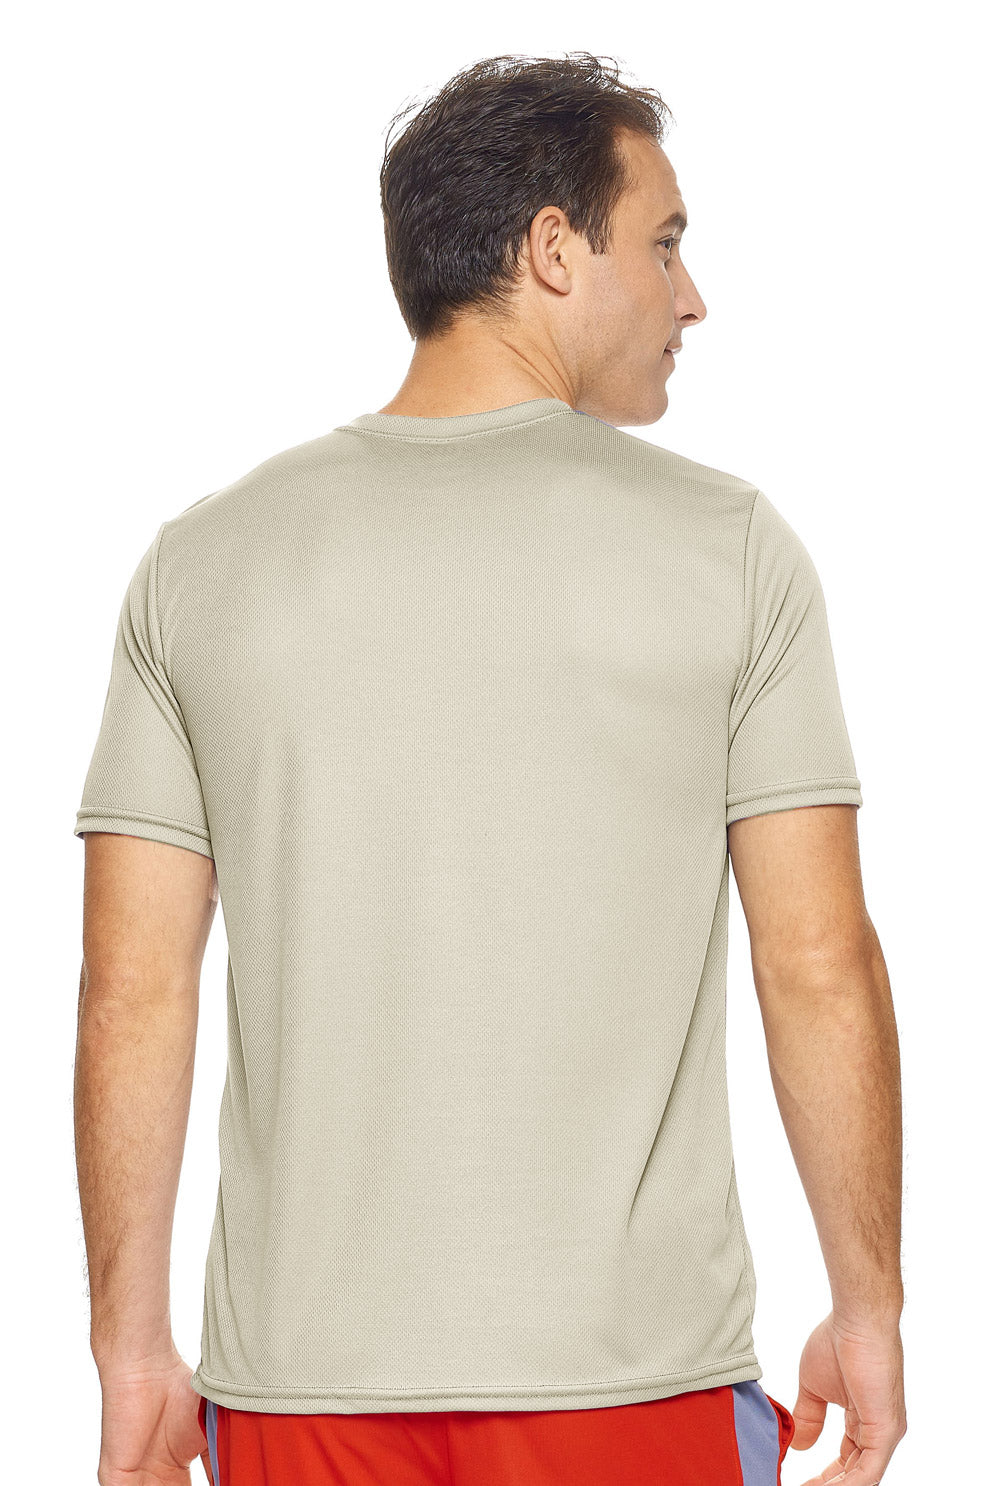 Expert Brand Wholesale Men's Oxymesh™ Short Sleeve Tec Tee Made in USA in Sand Image 3#sand